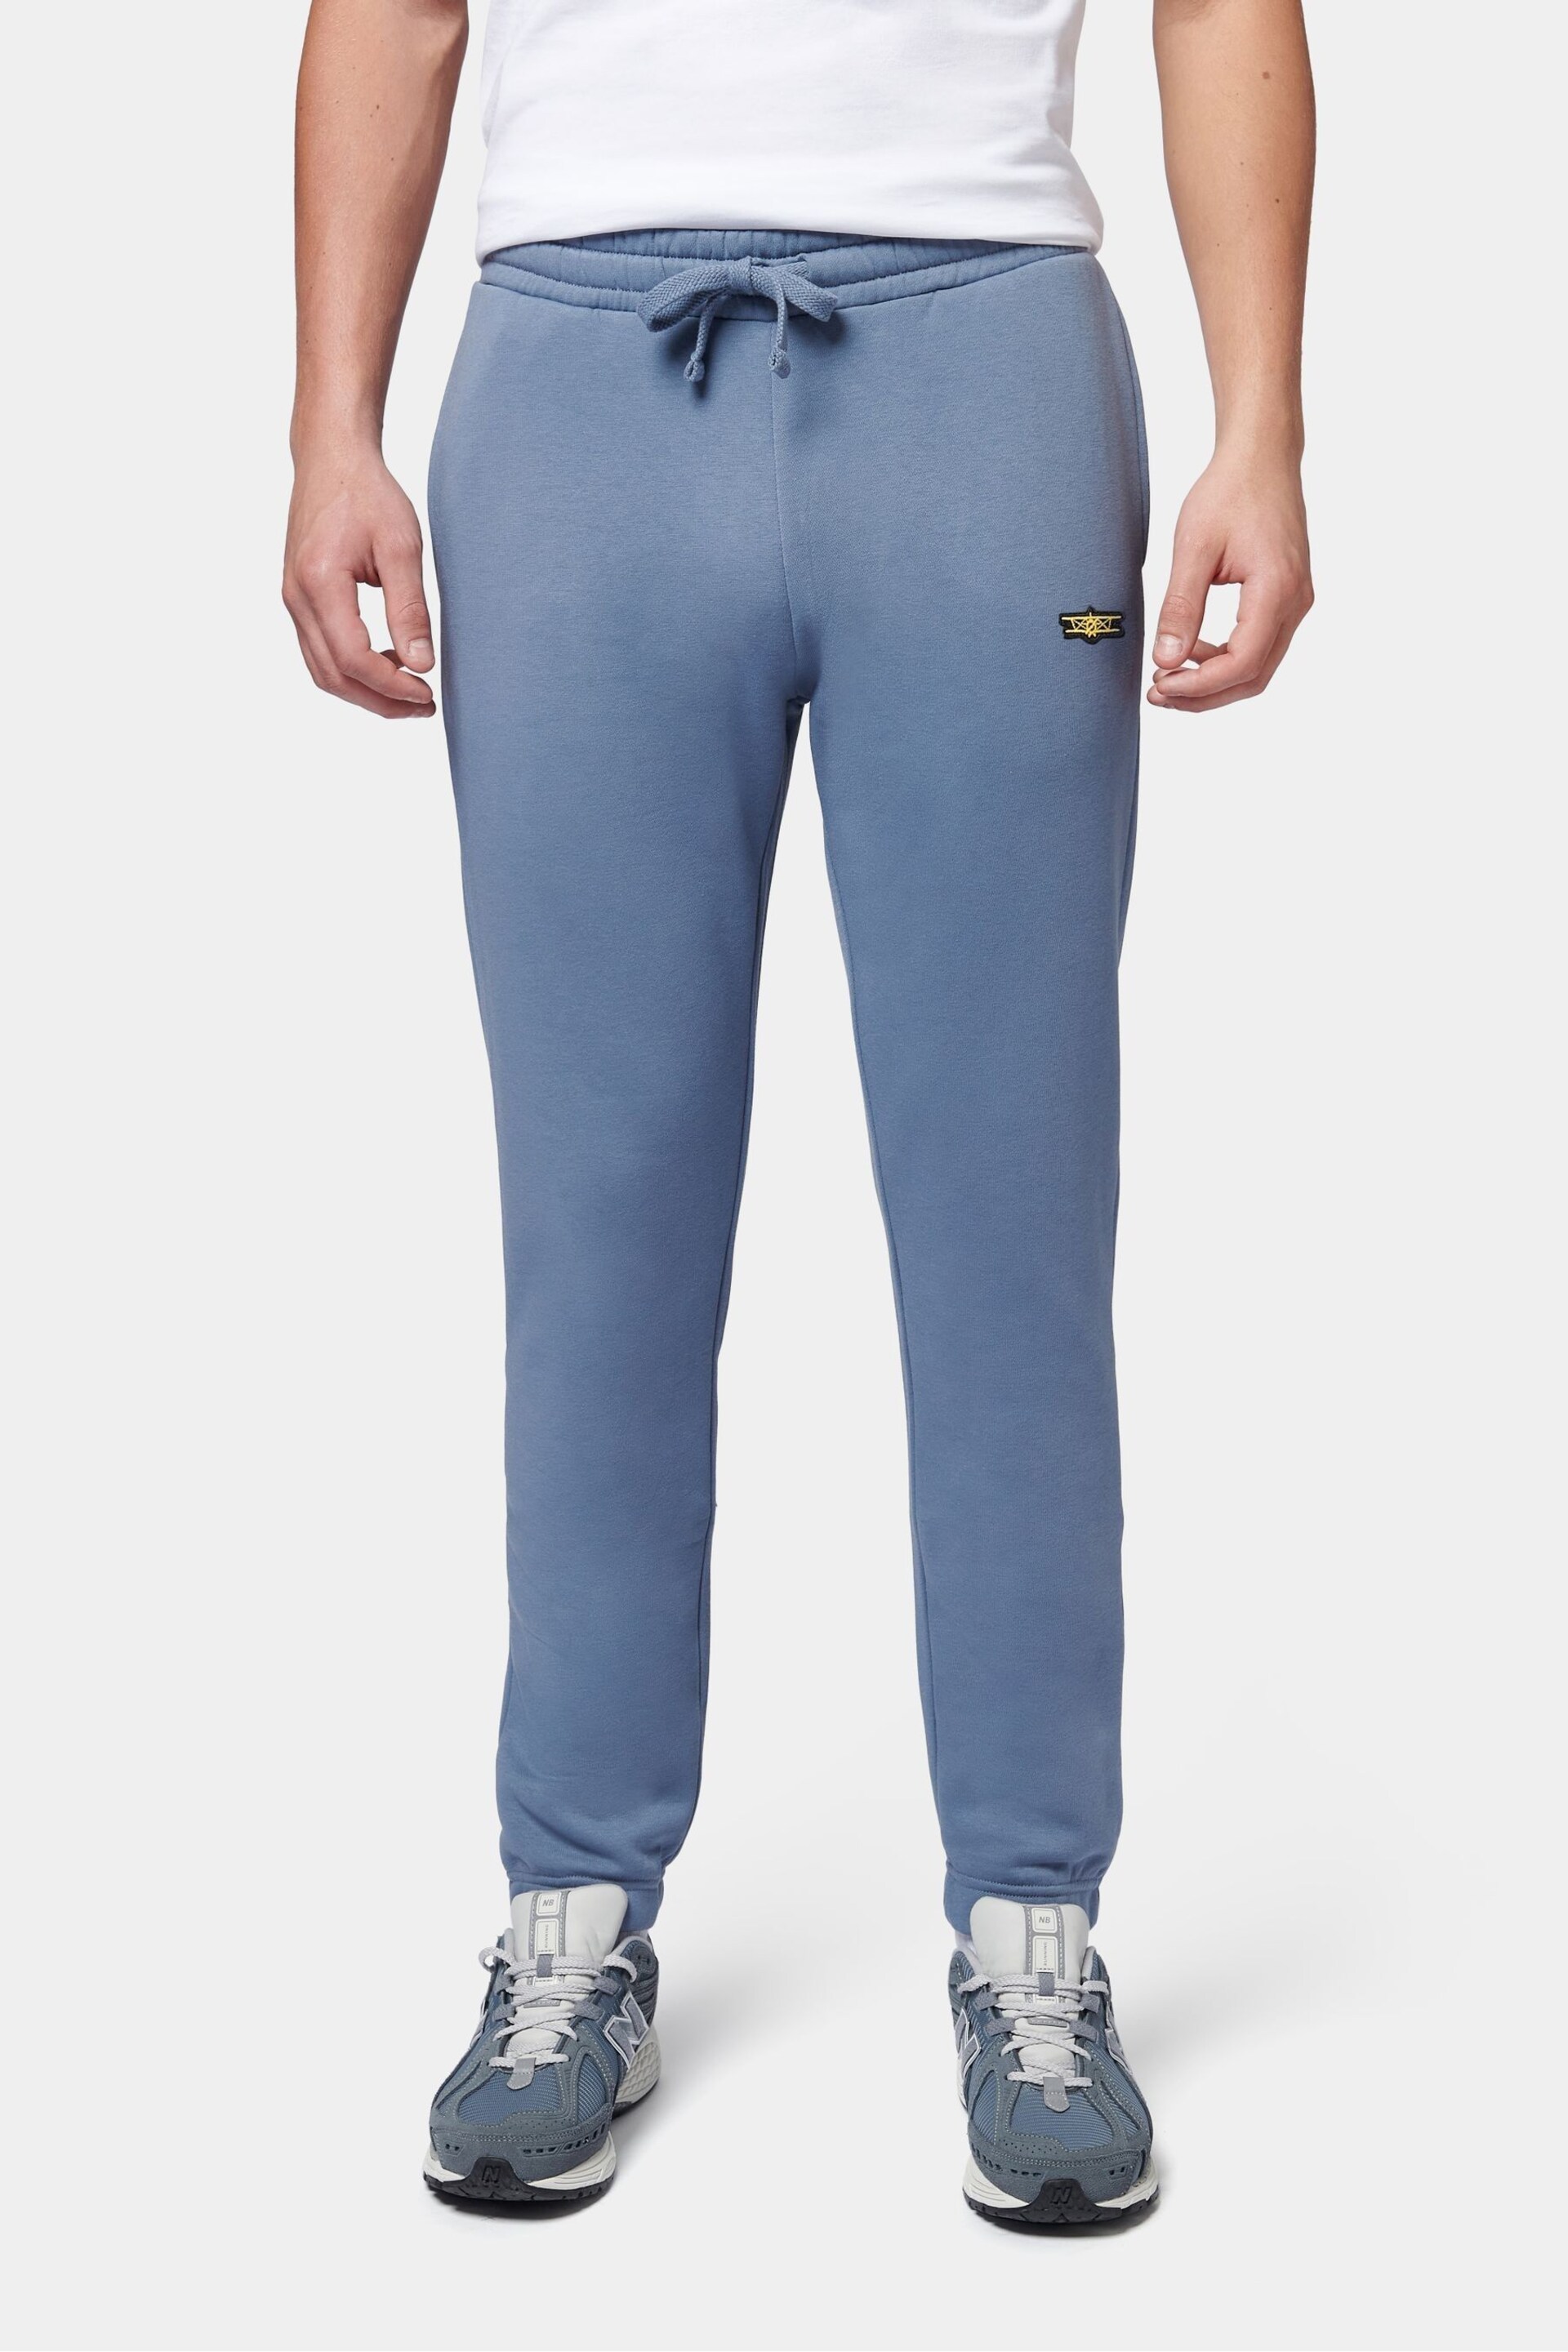 Flyers Mens Classic Fit Joggers - Image 1 of 8